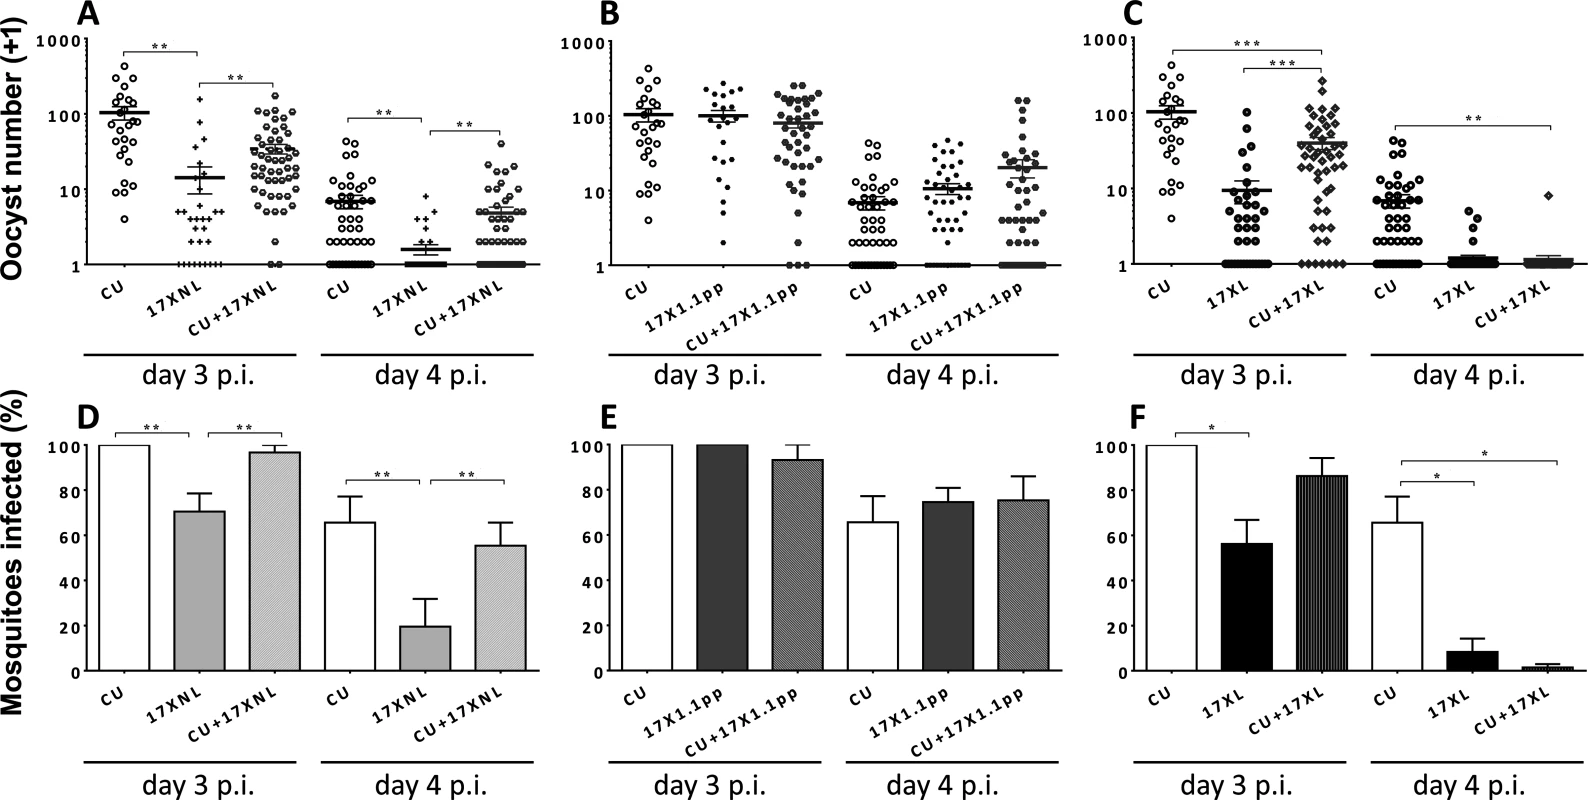 Transmission success of strains of <i>Plasmodium yoelii yoelii</i> in single and mixed strain infections.